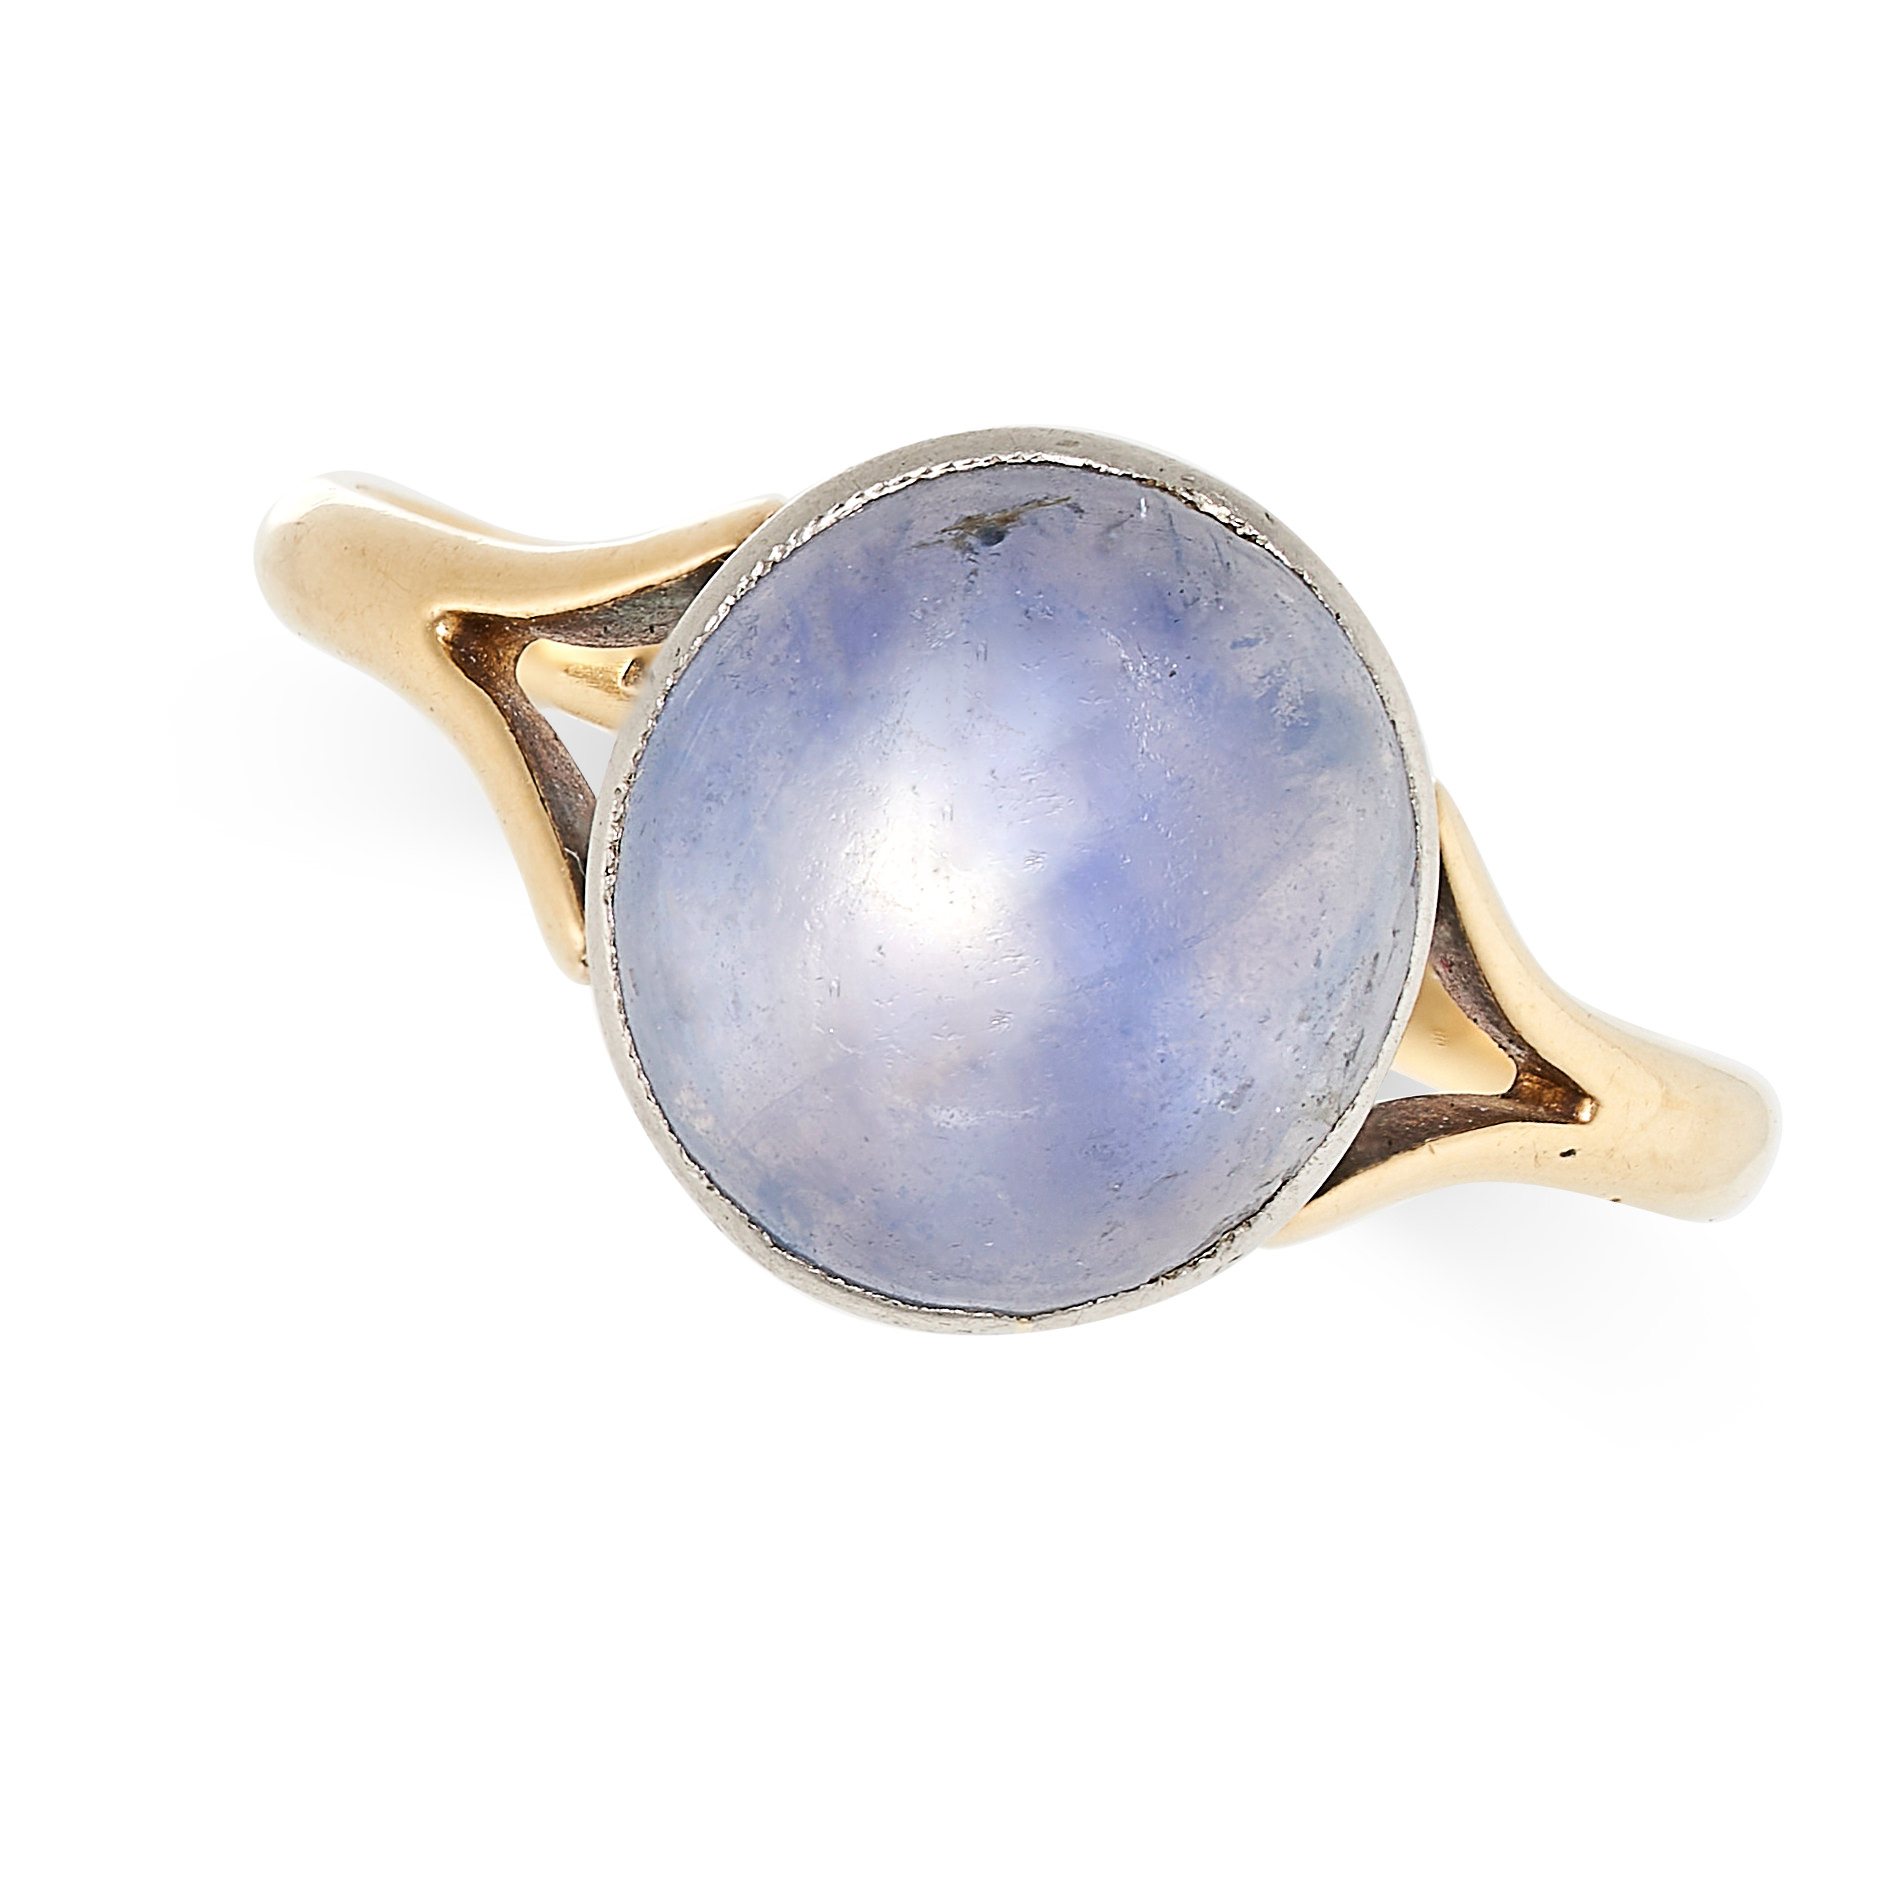 AN ANTIQUE STAR SAPPHIRE RING in yellow gold, set with a cabochon star sapphire, marked - Image 2 of 3